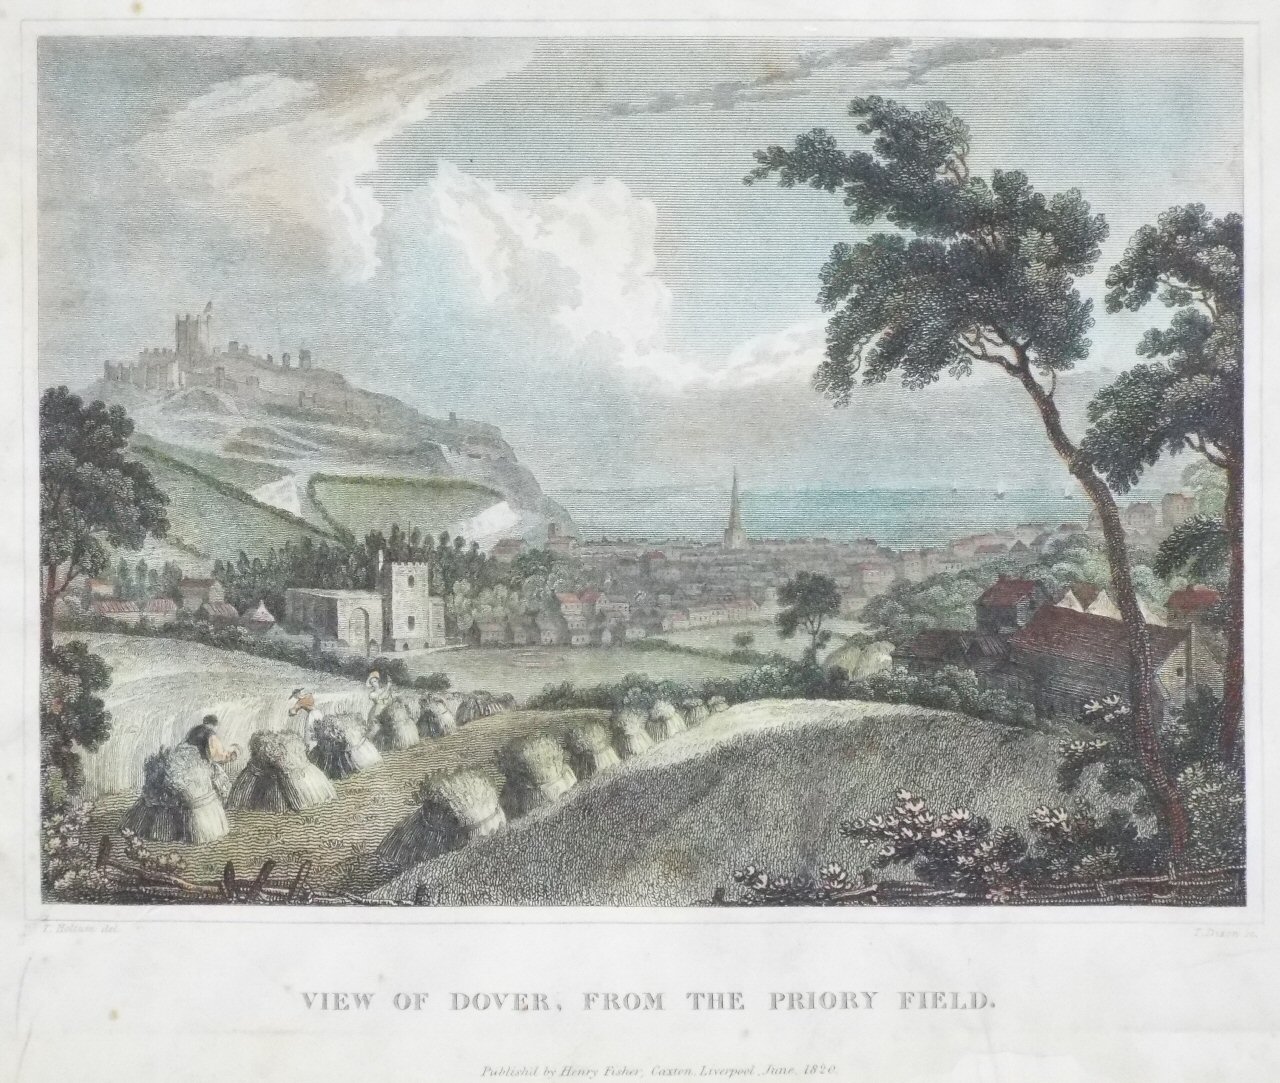 Print - View of Dover, from the Priory Field. - Dixon